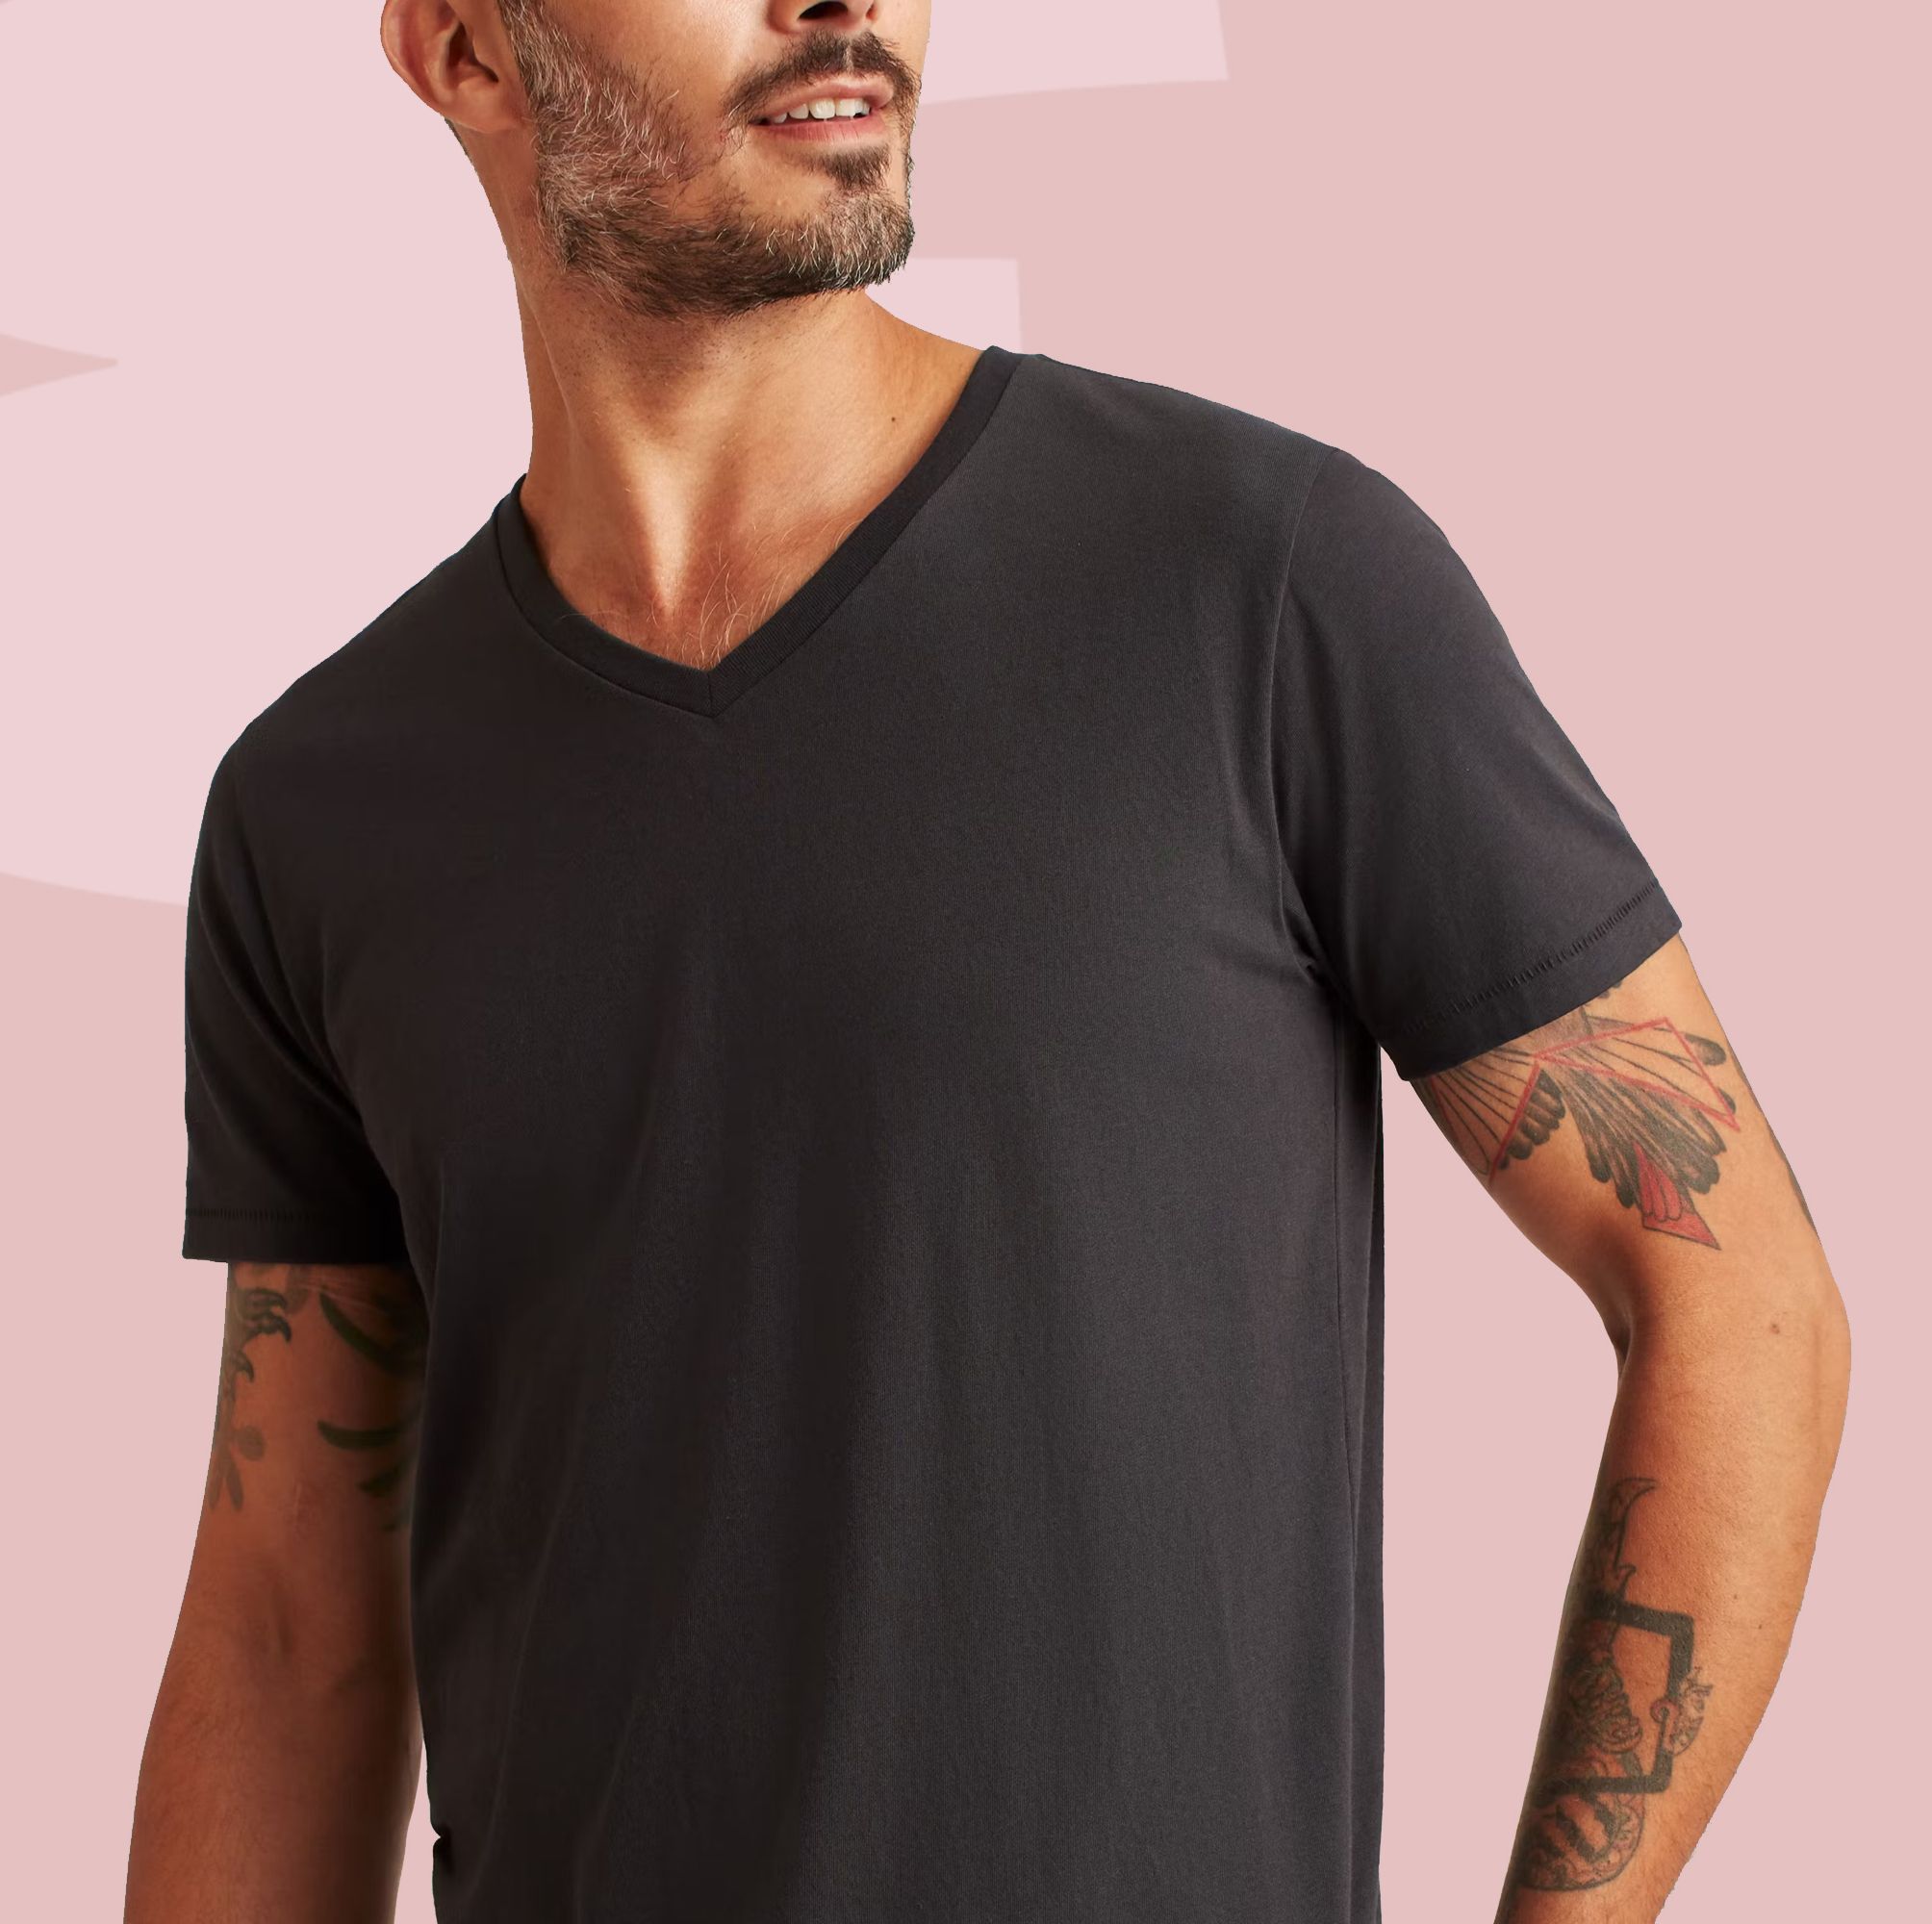 The 30 Best V-Neck T-Shirts to Wear on Their Own (or Under a Button-Up)